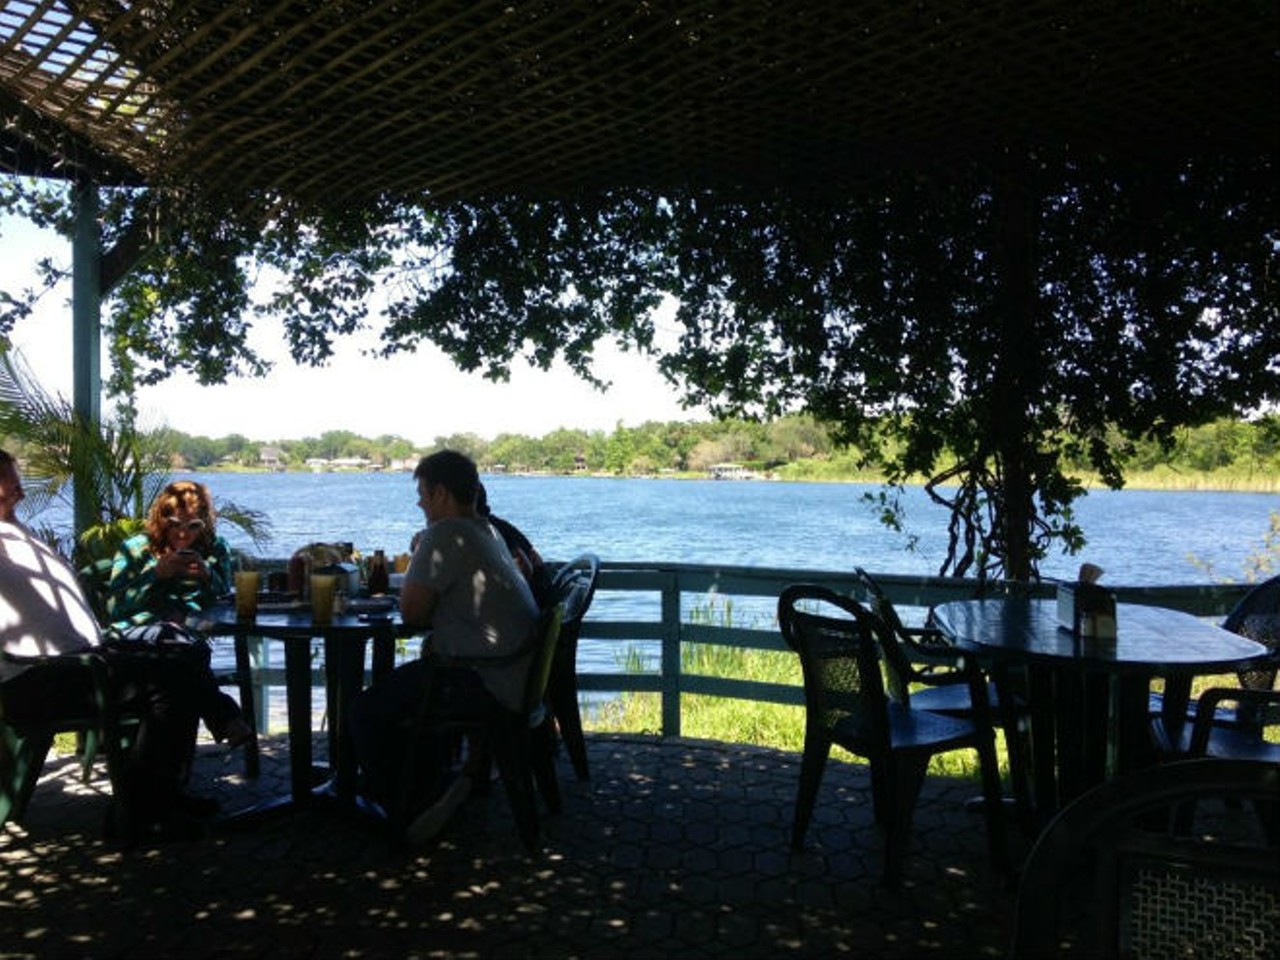 Julie's Waterfront
4201 S Orange Ave, 407-240-2557
Sipping on a gin and tonic and taking in the view of Lake Jennie Jewel on this beautiful patio cannot be beat. It's also a dog-friendly patio so bring your pooch. 
Photo by Yelp